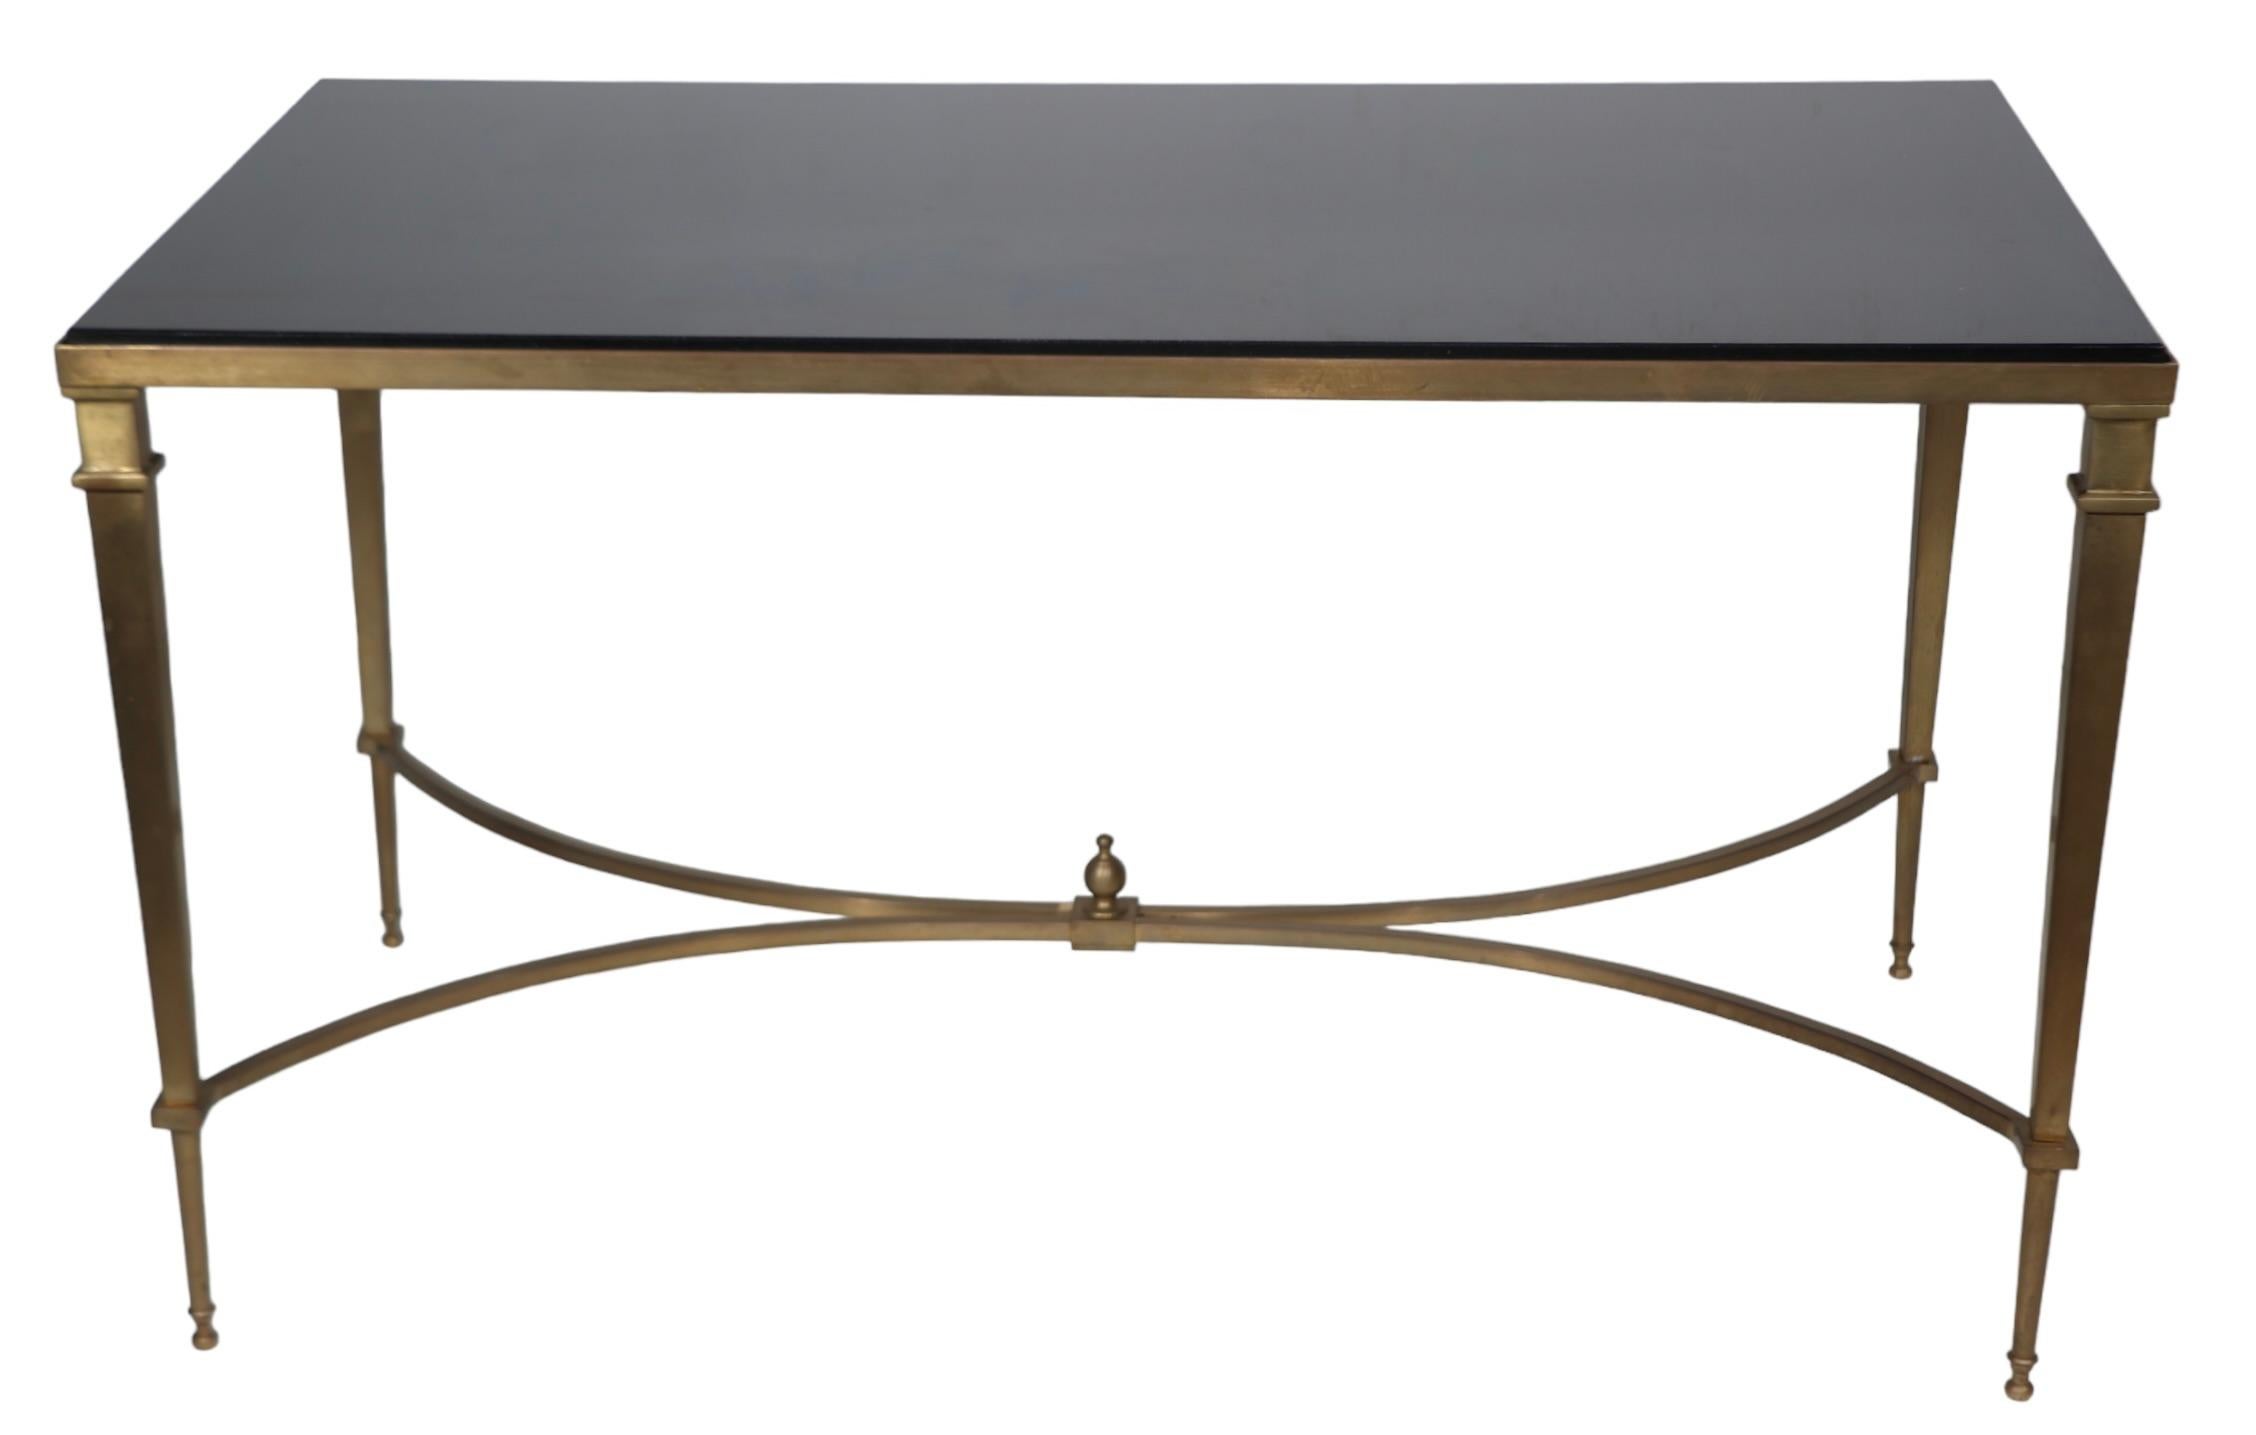 American Hollywood Regency Neoclassic Style Brass and Granite Coffee Table c 1960/70's  For Sale